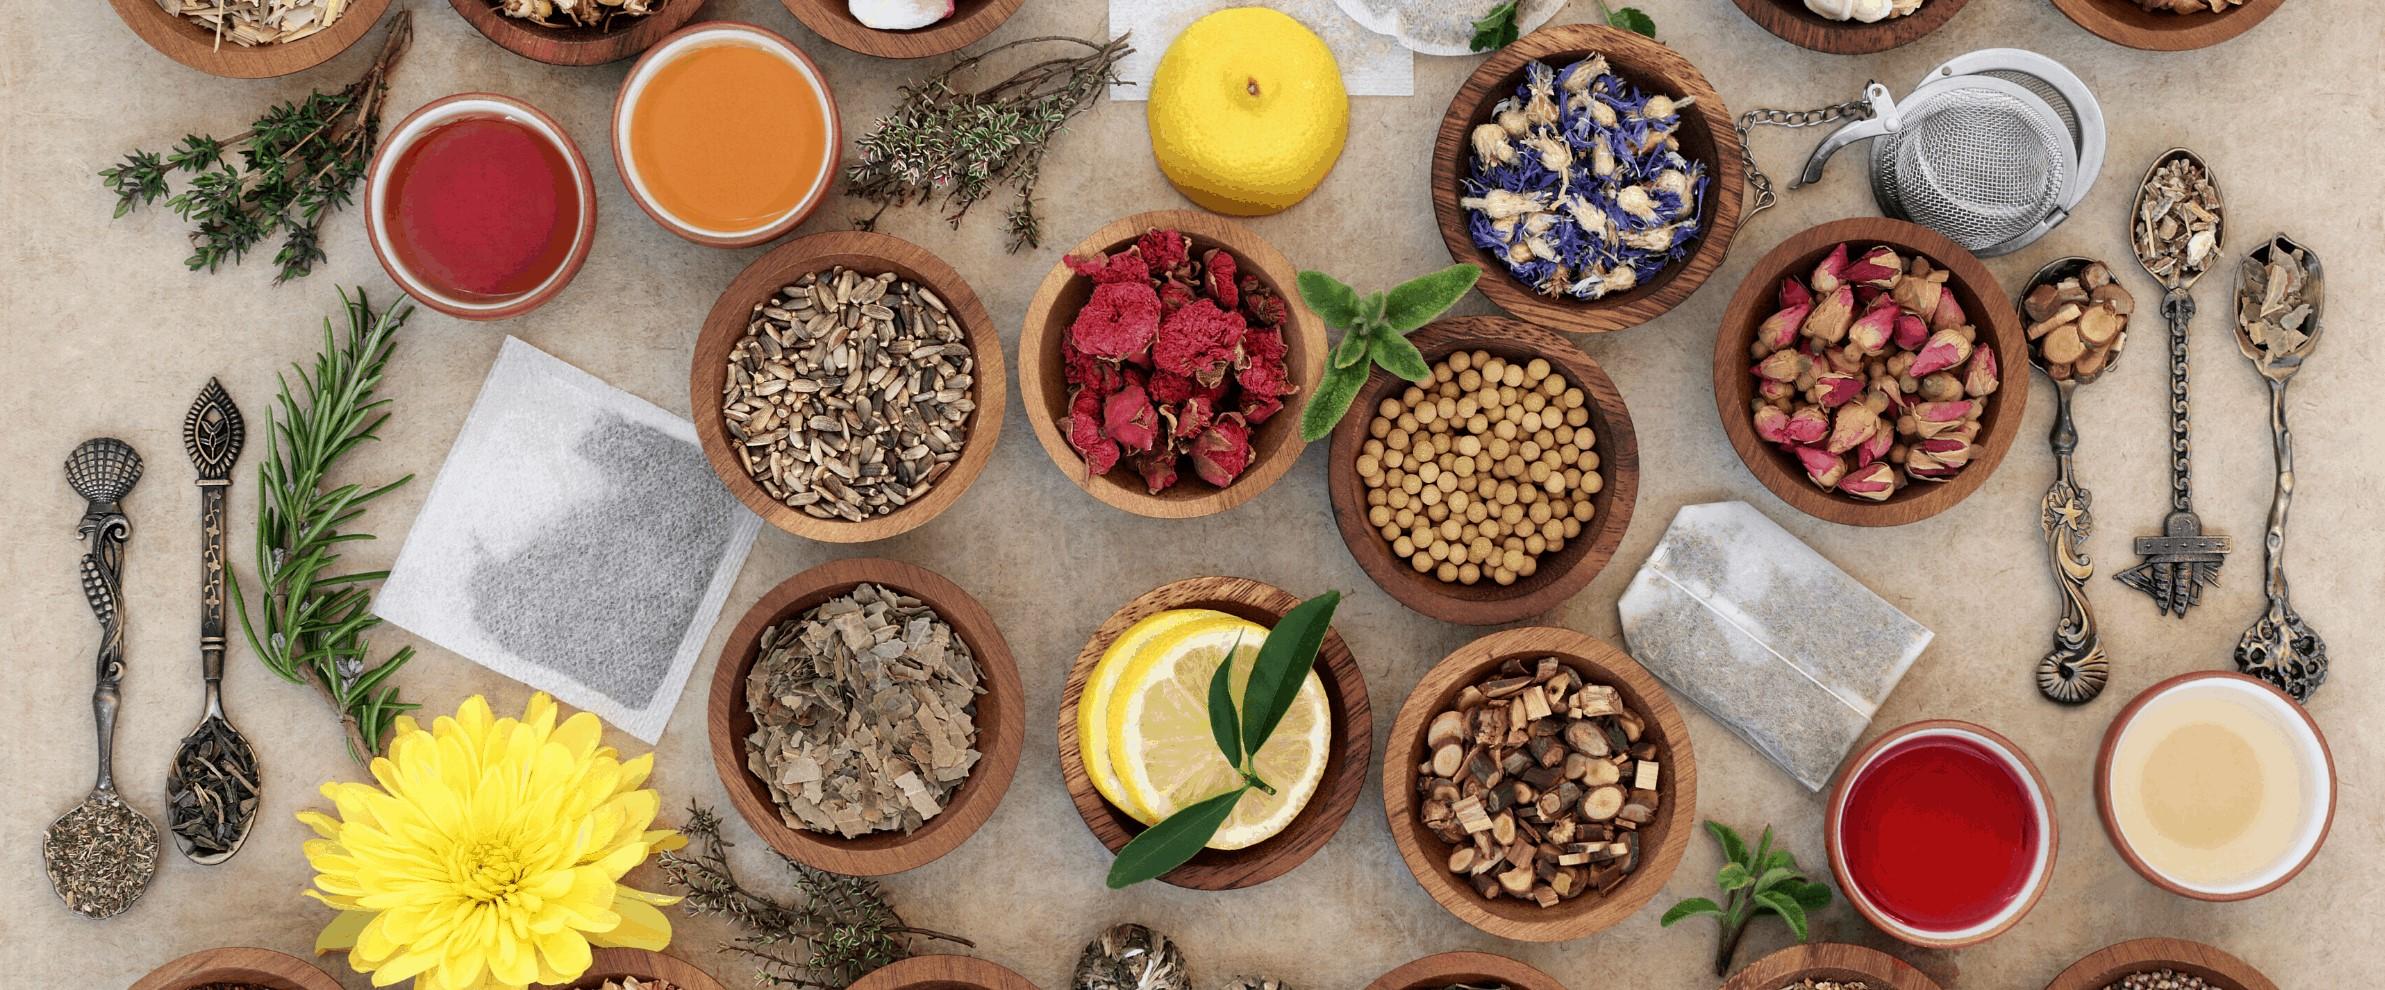 Ayurvedic Beauty Brands Keep Flying Off the Shelves - Here’s Why You Want to Incorporate Them Into Your Skincare Routine Stat